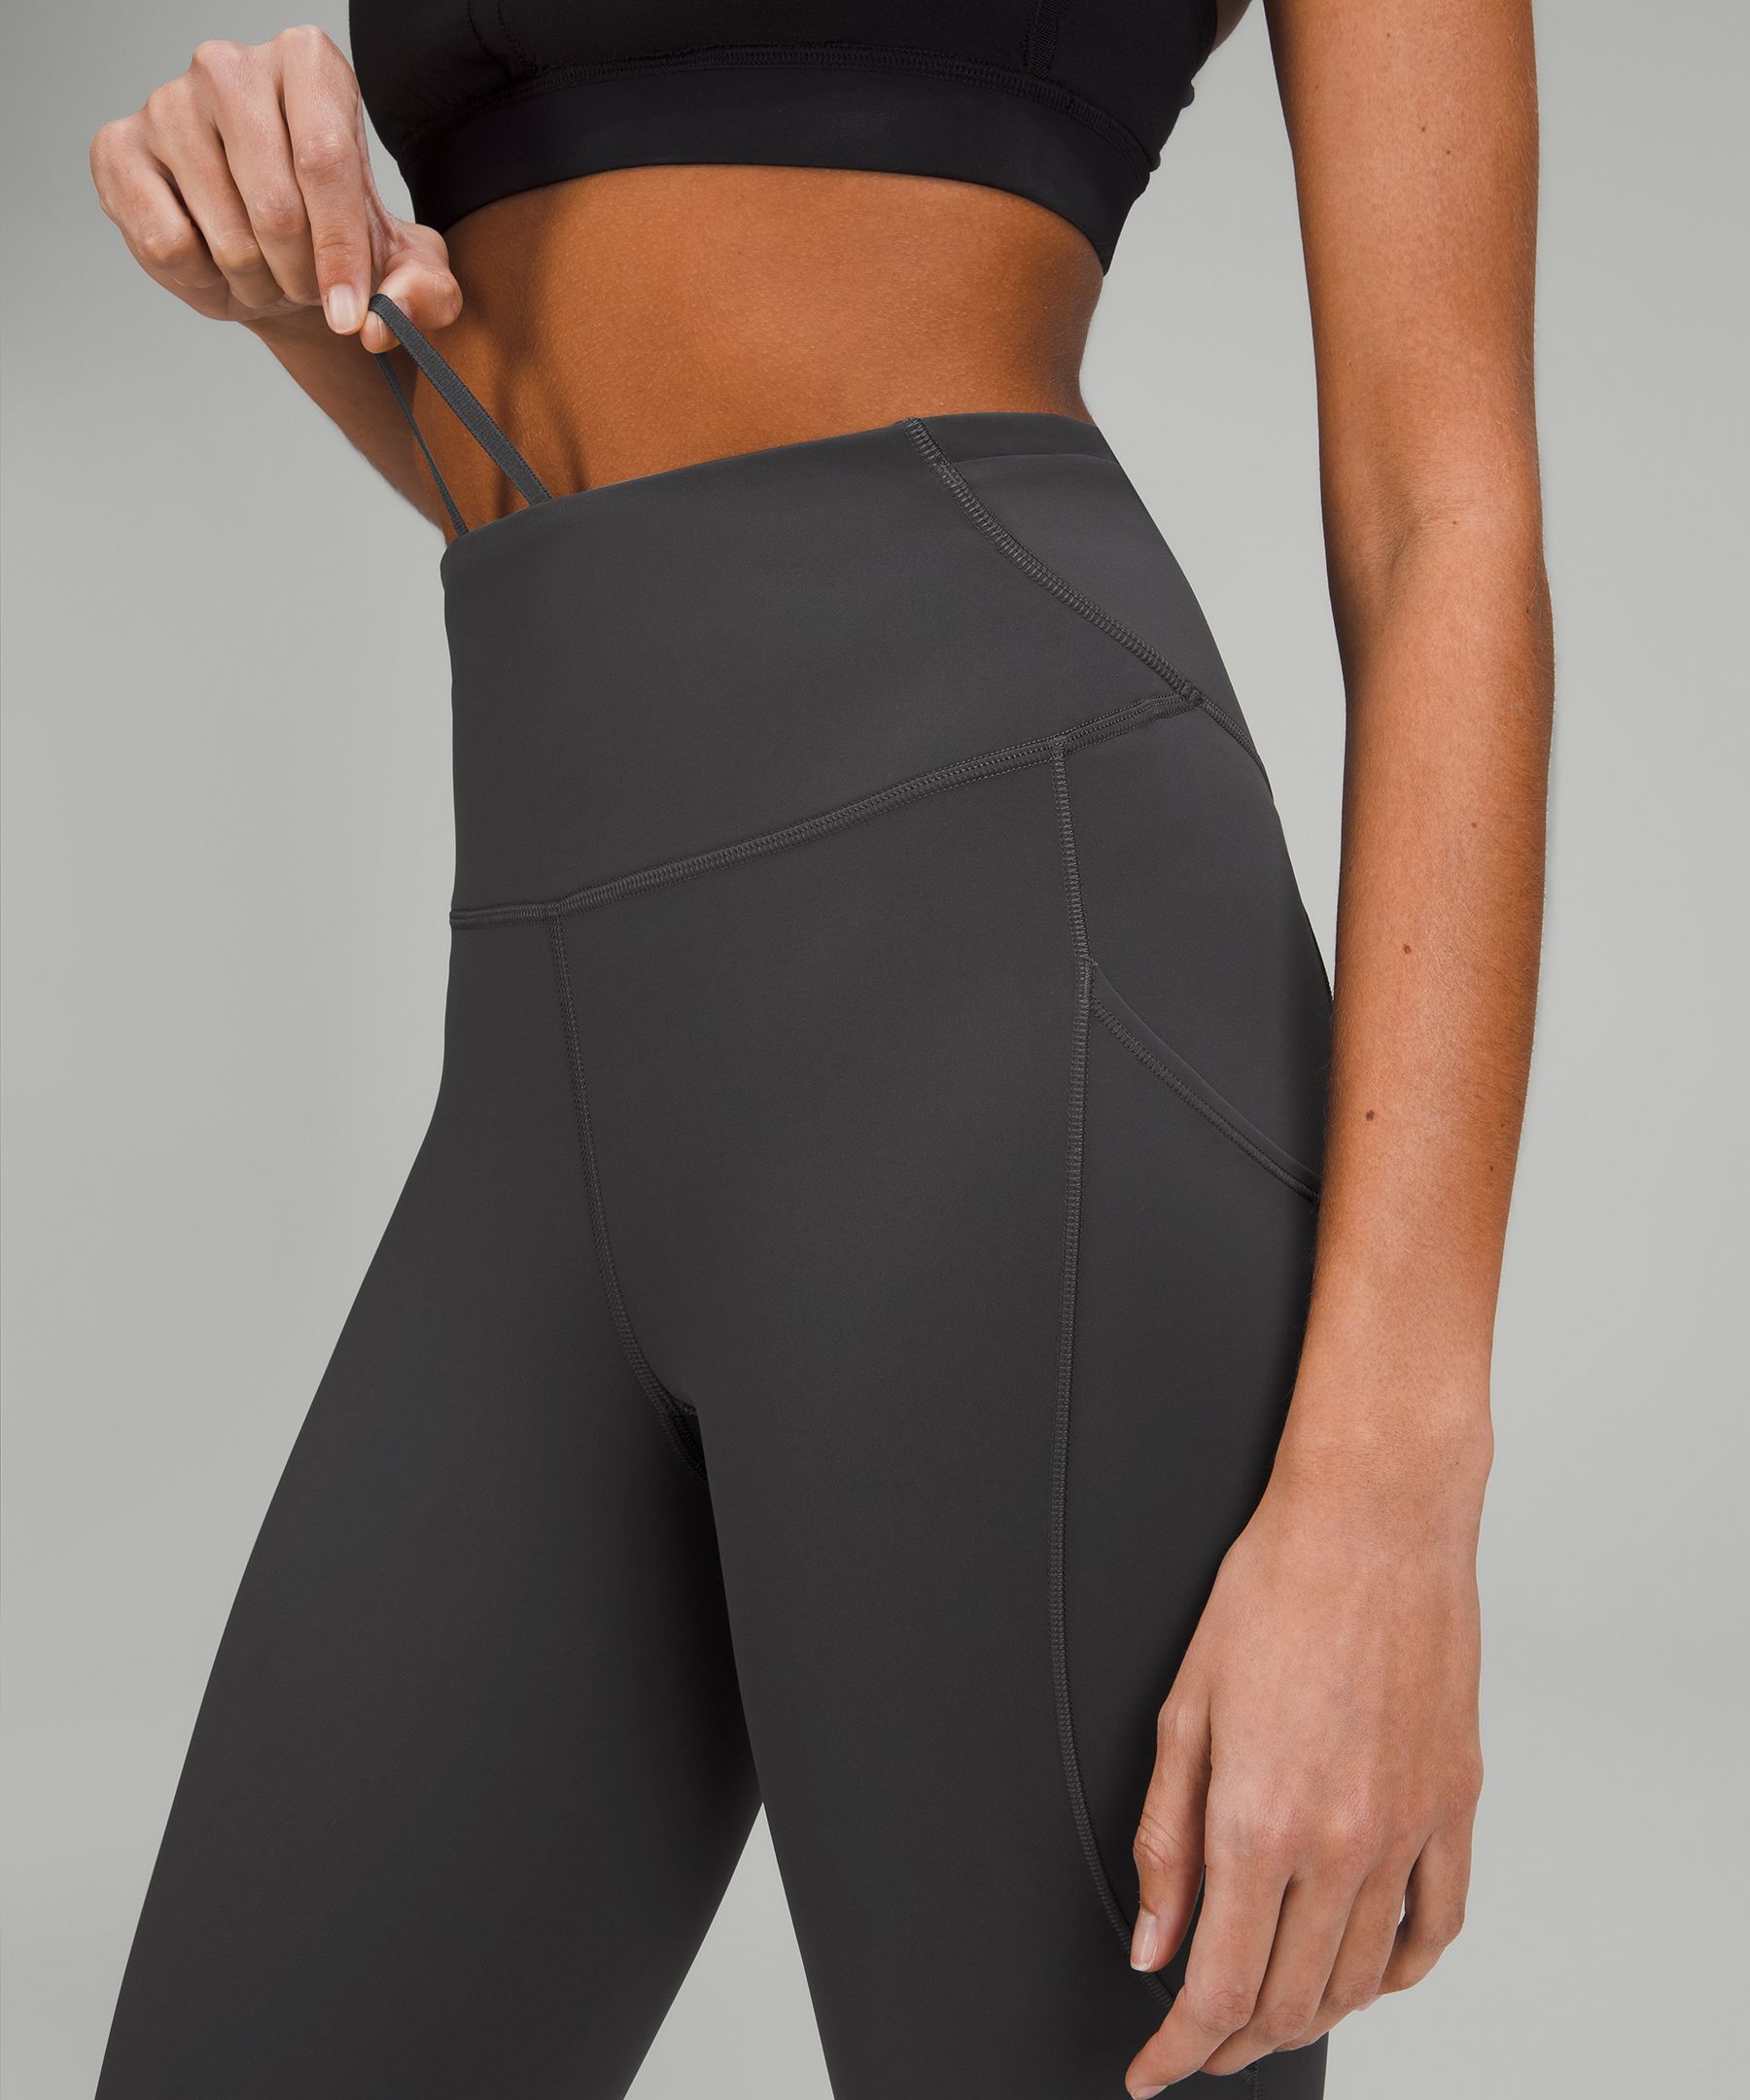 Lululemon Fast and Free High-Rise Tight 25” Pockets Updated Size 10 - $106  New With Tags - From Shayne